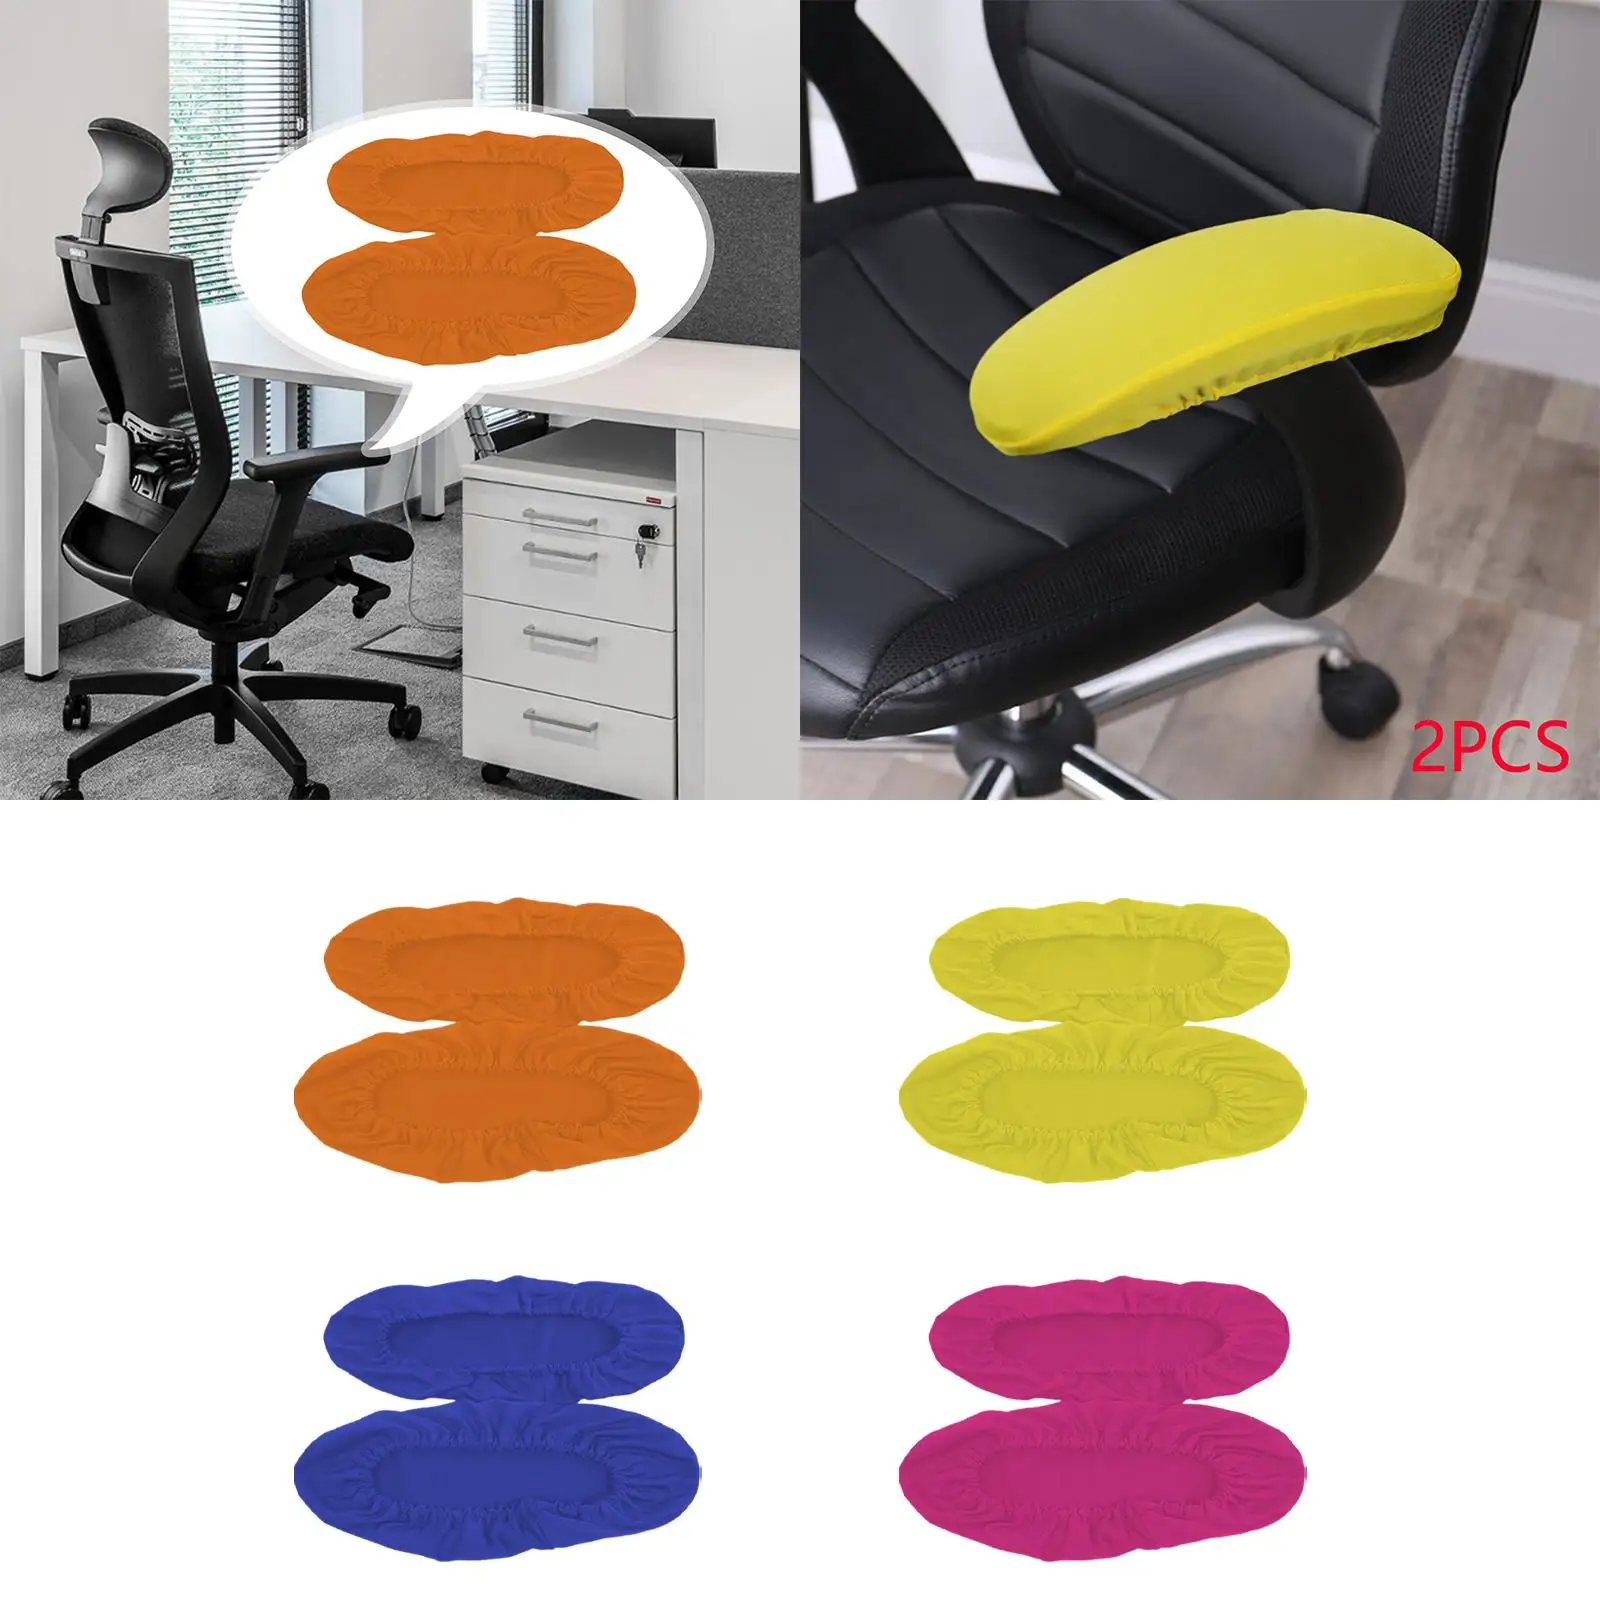 2Pcs Elastic Office Chair Arm Covers, Arm Protectors Rest Sleeves, Computer Chair Arm Slipcover for Computer Gaming Chairs